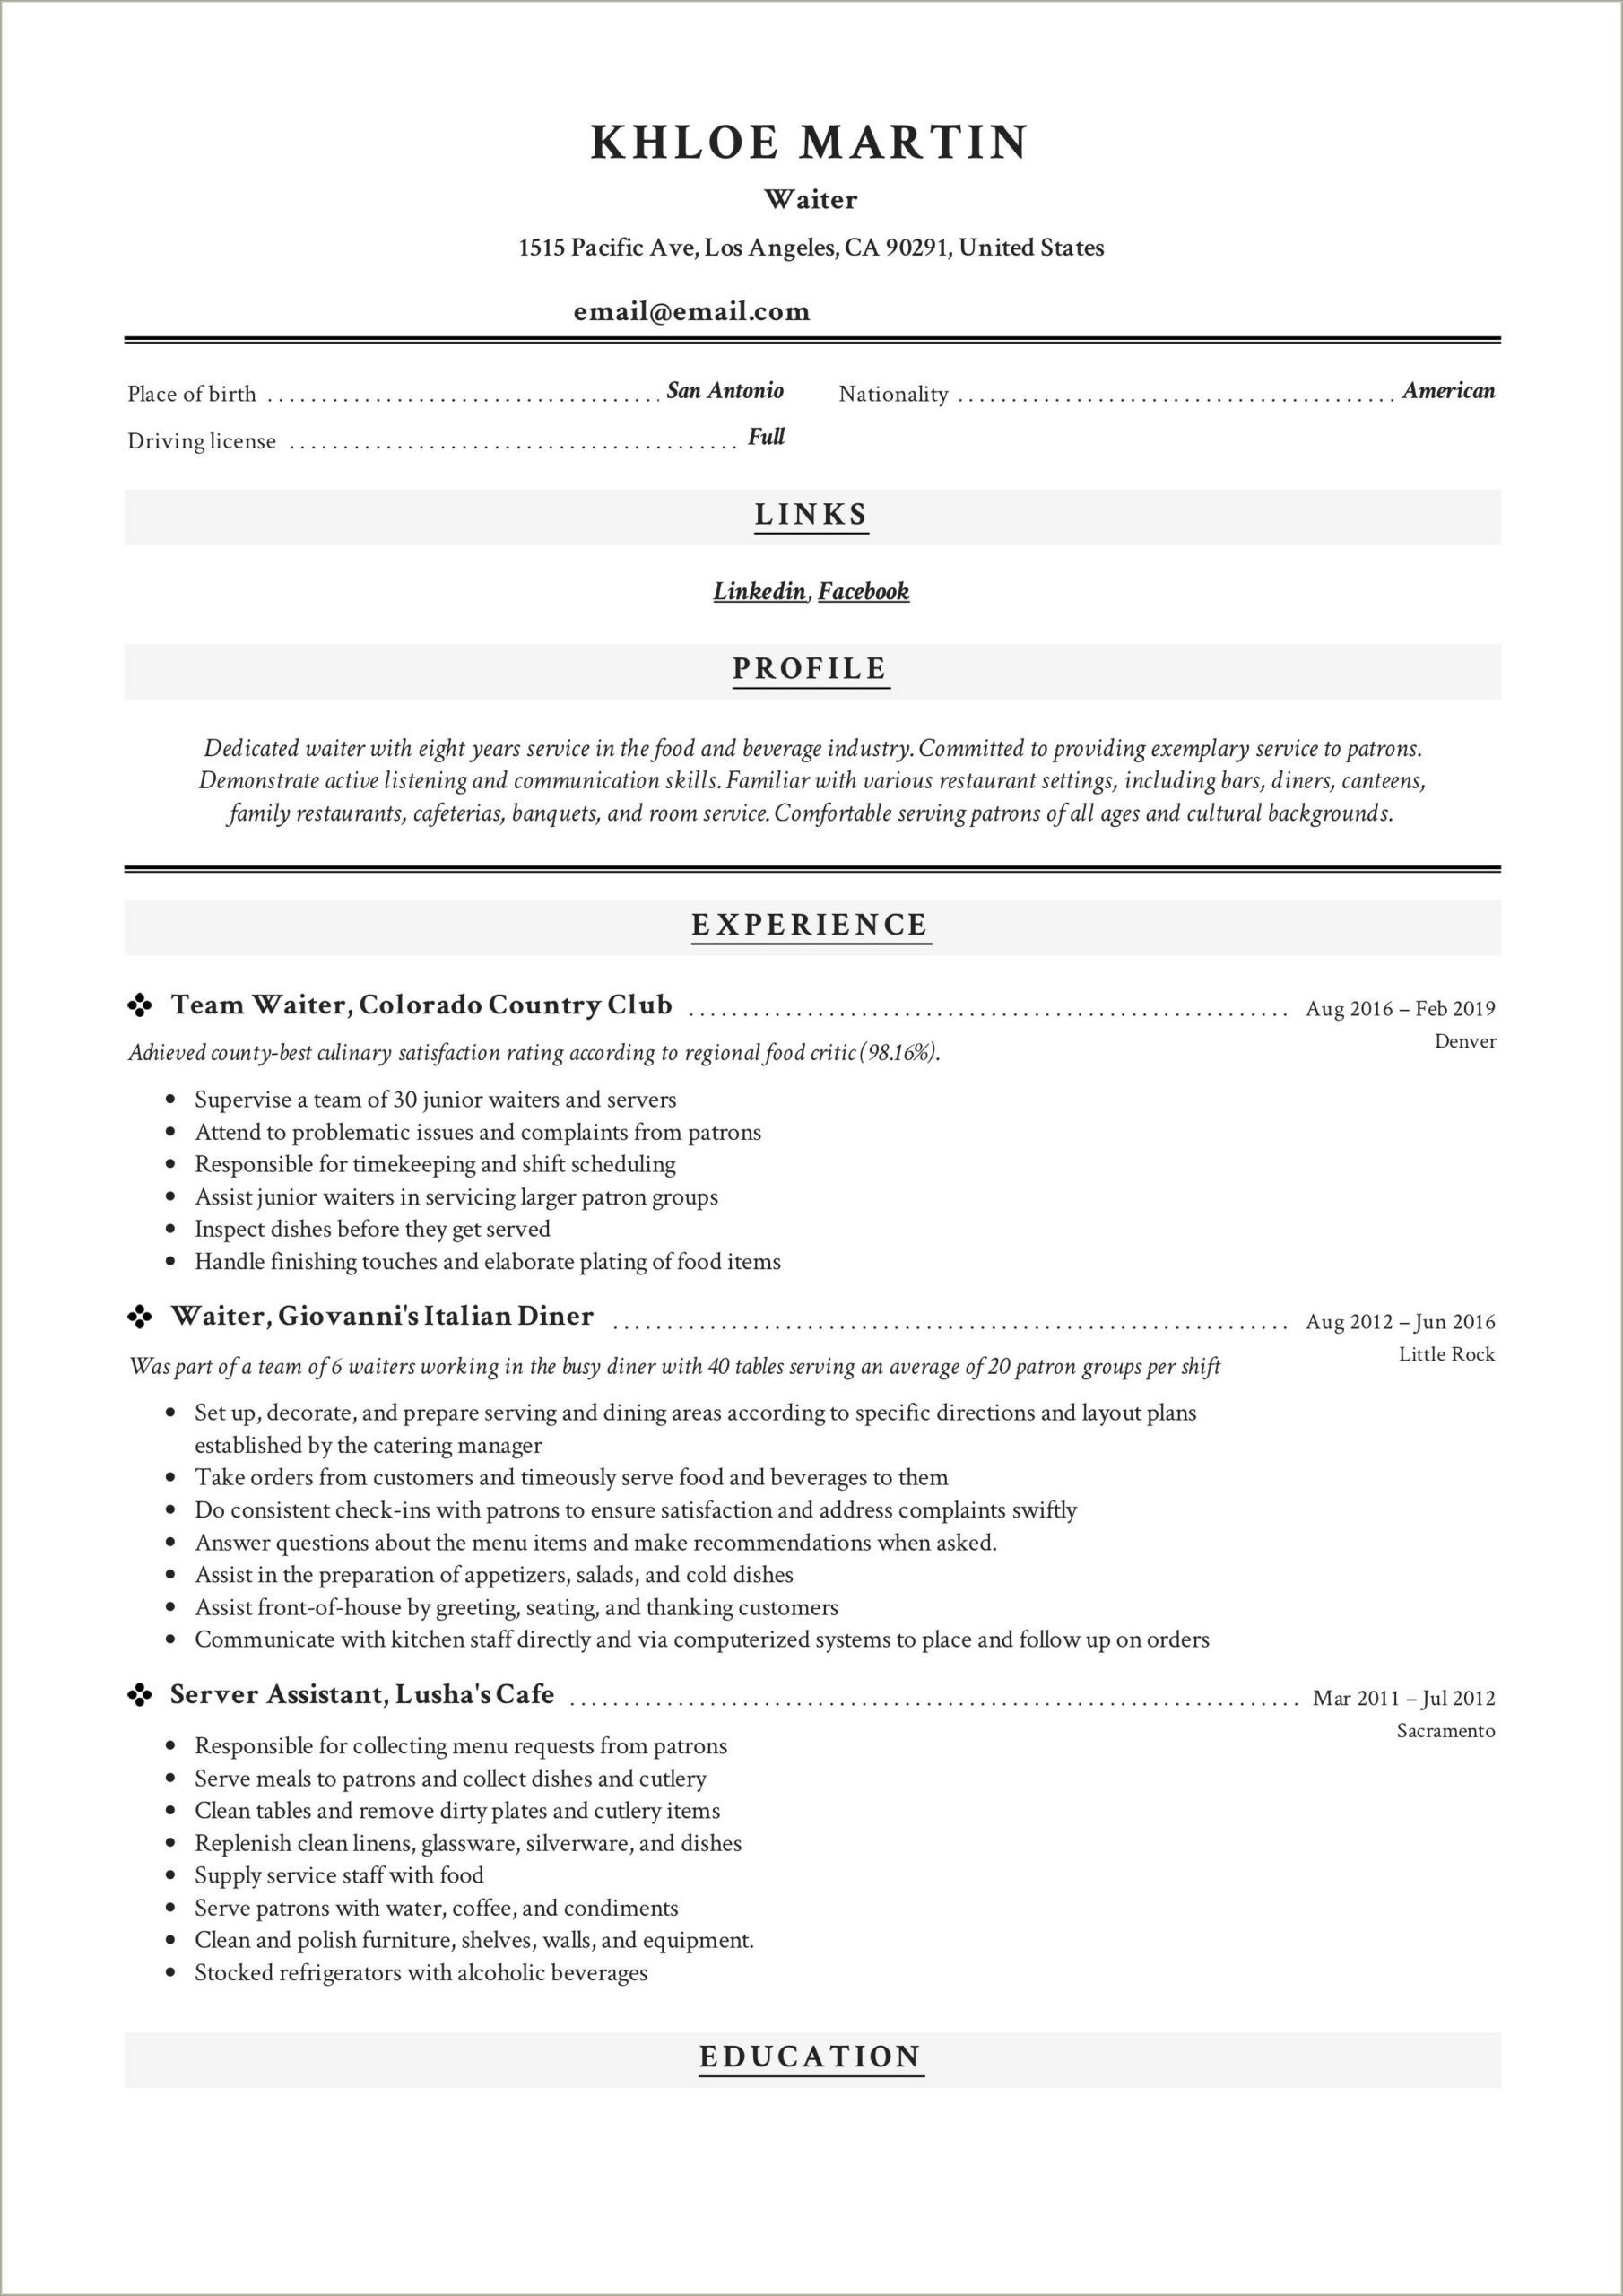 Sample Resume For A Hotel Server Without Experience